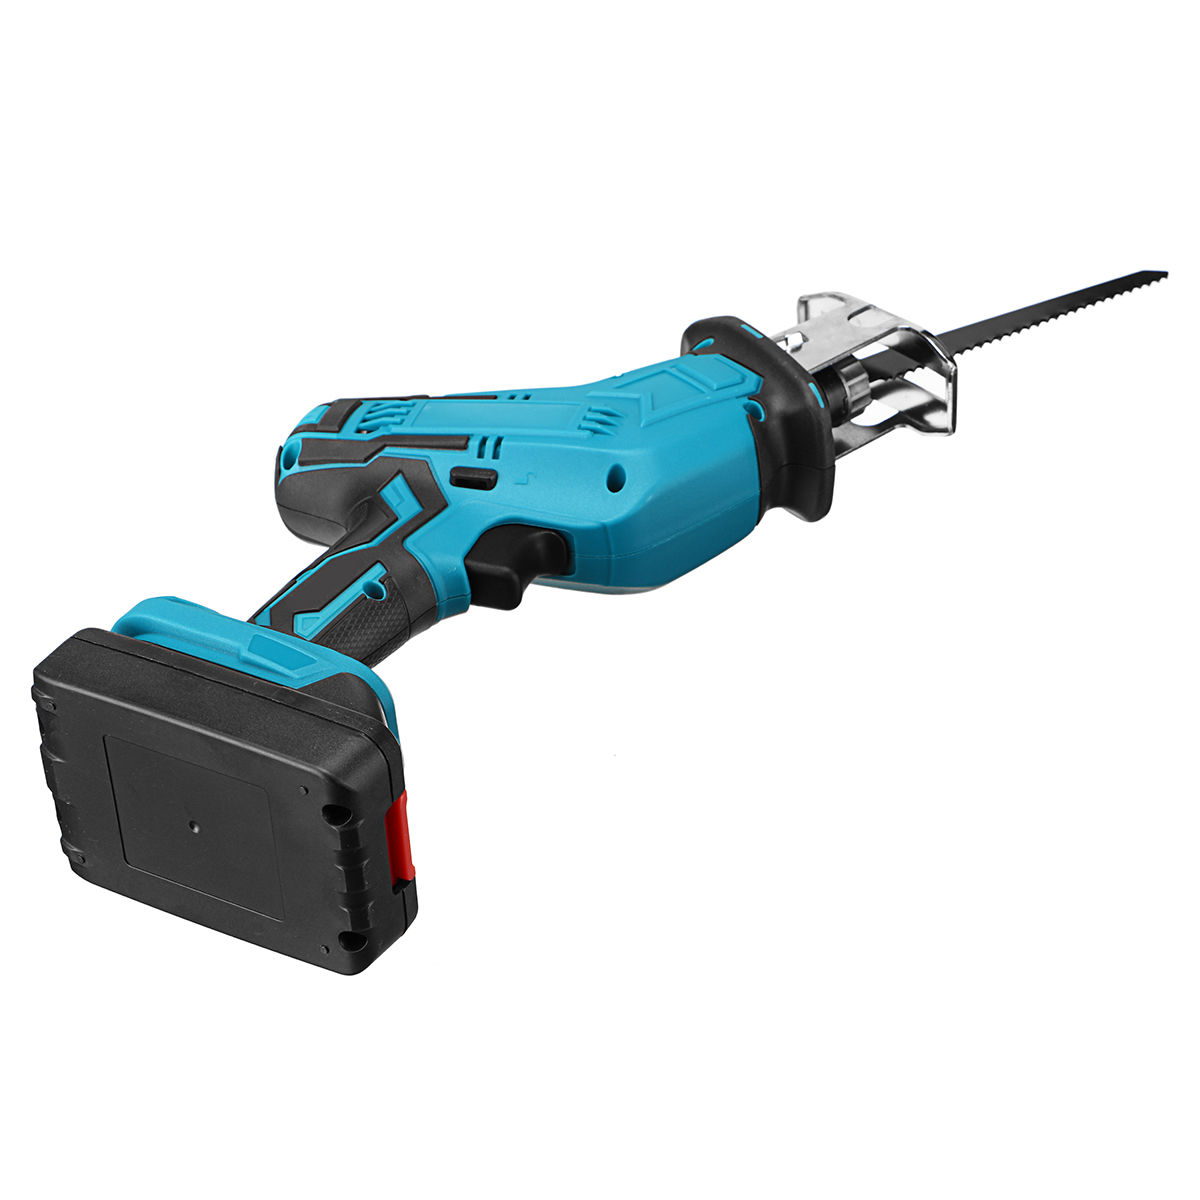 21V-Cordless-Reciprocating-Saw-Electric-Sabre-Saw-Woodworking-Wood-Metal-Cutting-With-1-Battery-1774259-6